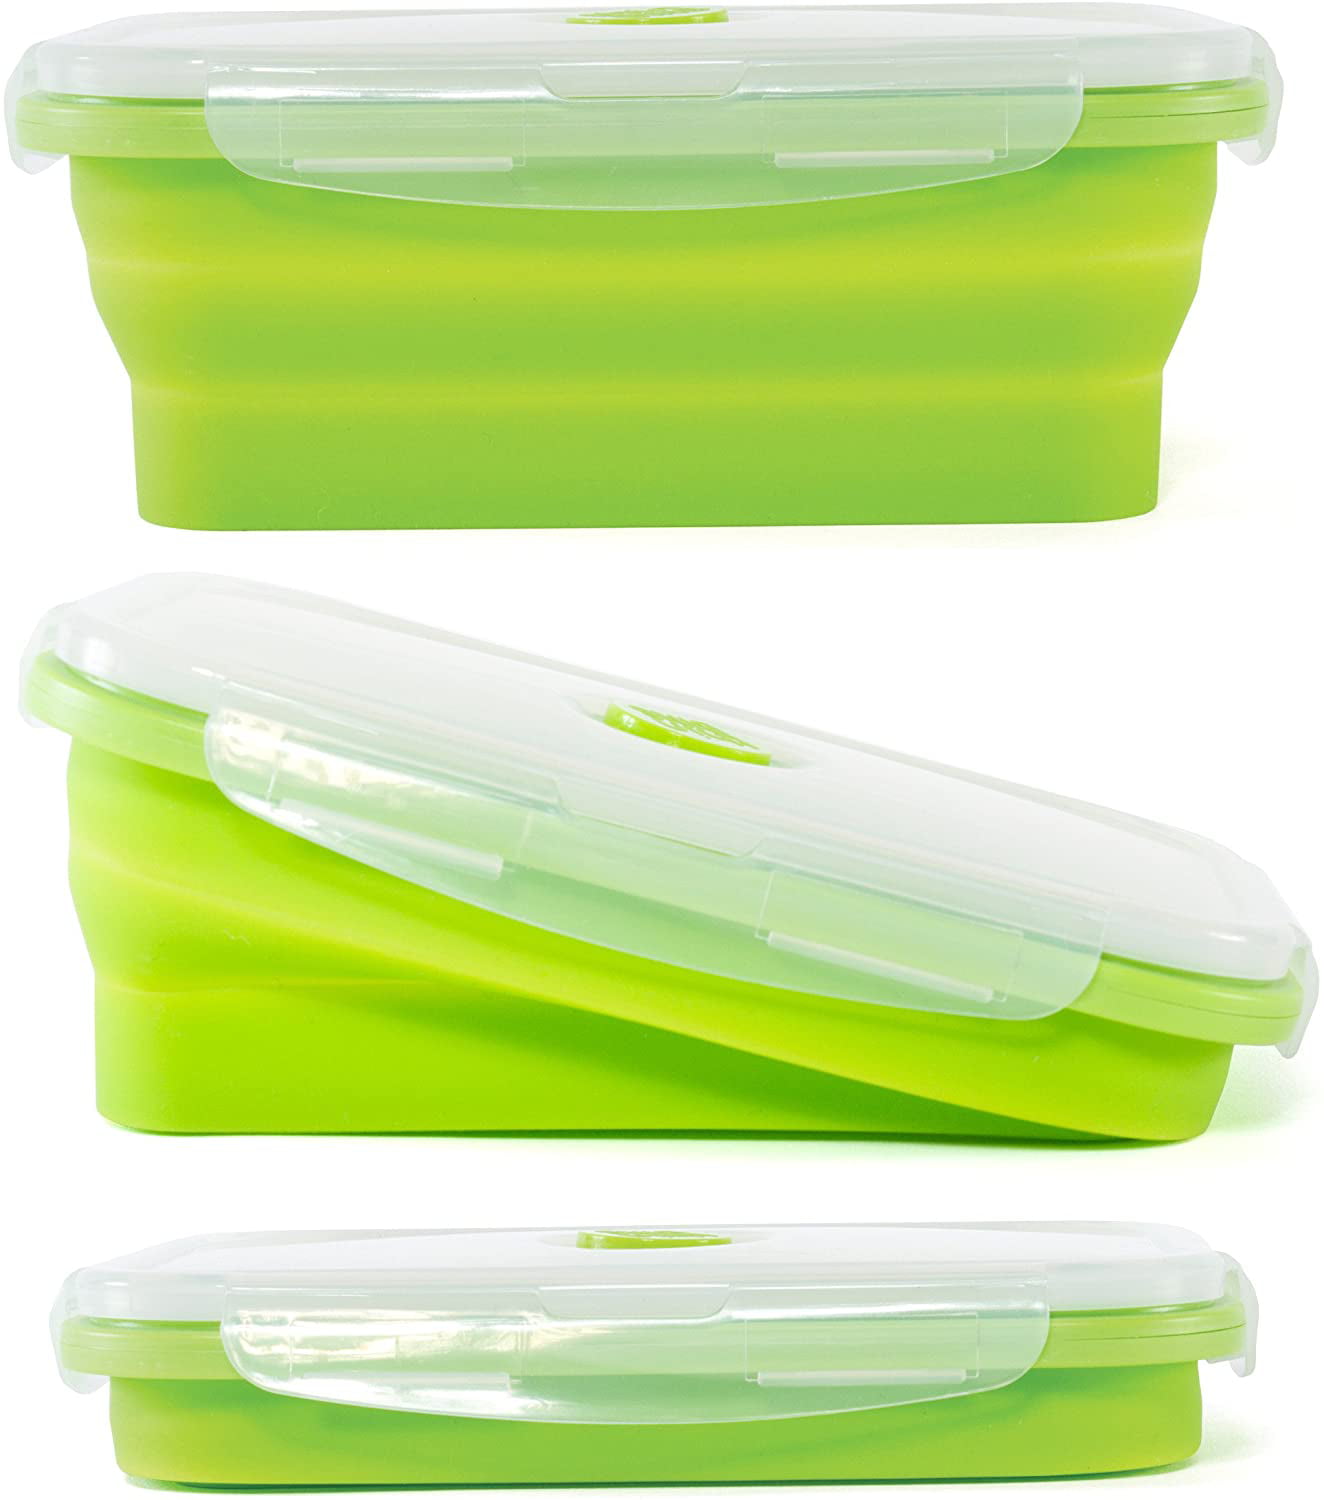 Dtk Microwave Safe Silicone Meal BPA Free Food Storage Containers Airtight  Silicone Lunch Box with Scale - China Baking Tool and Kitchenware Set price